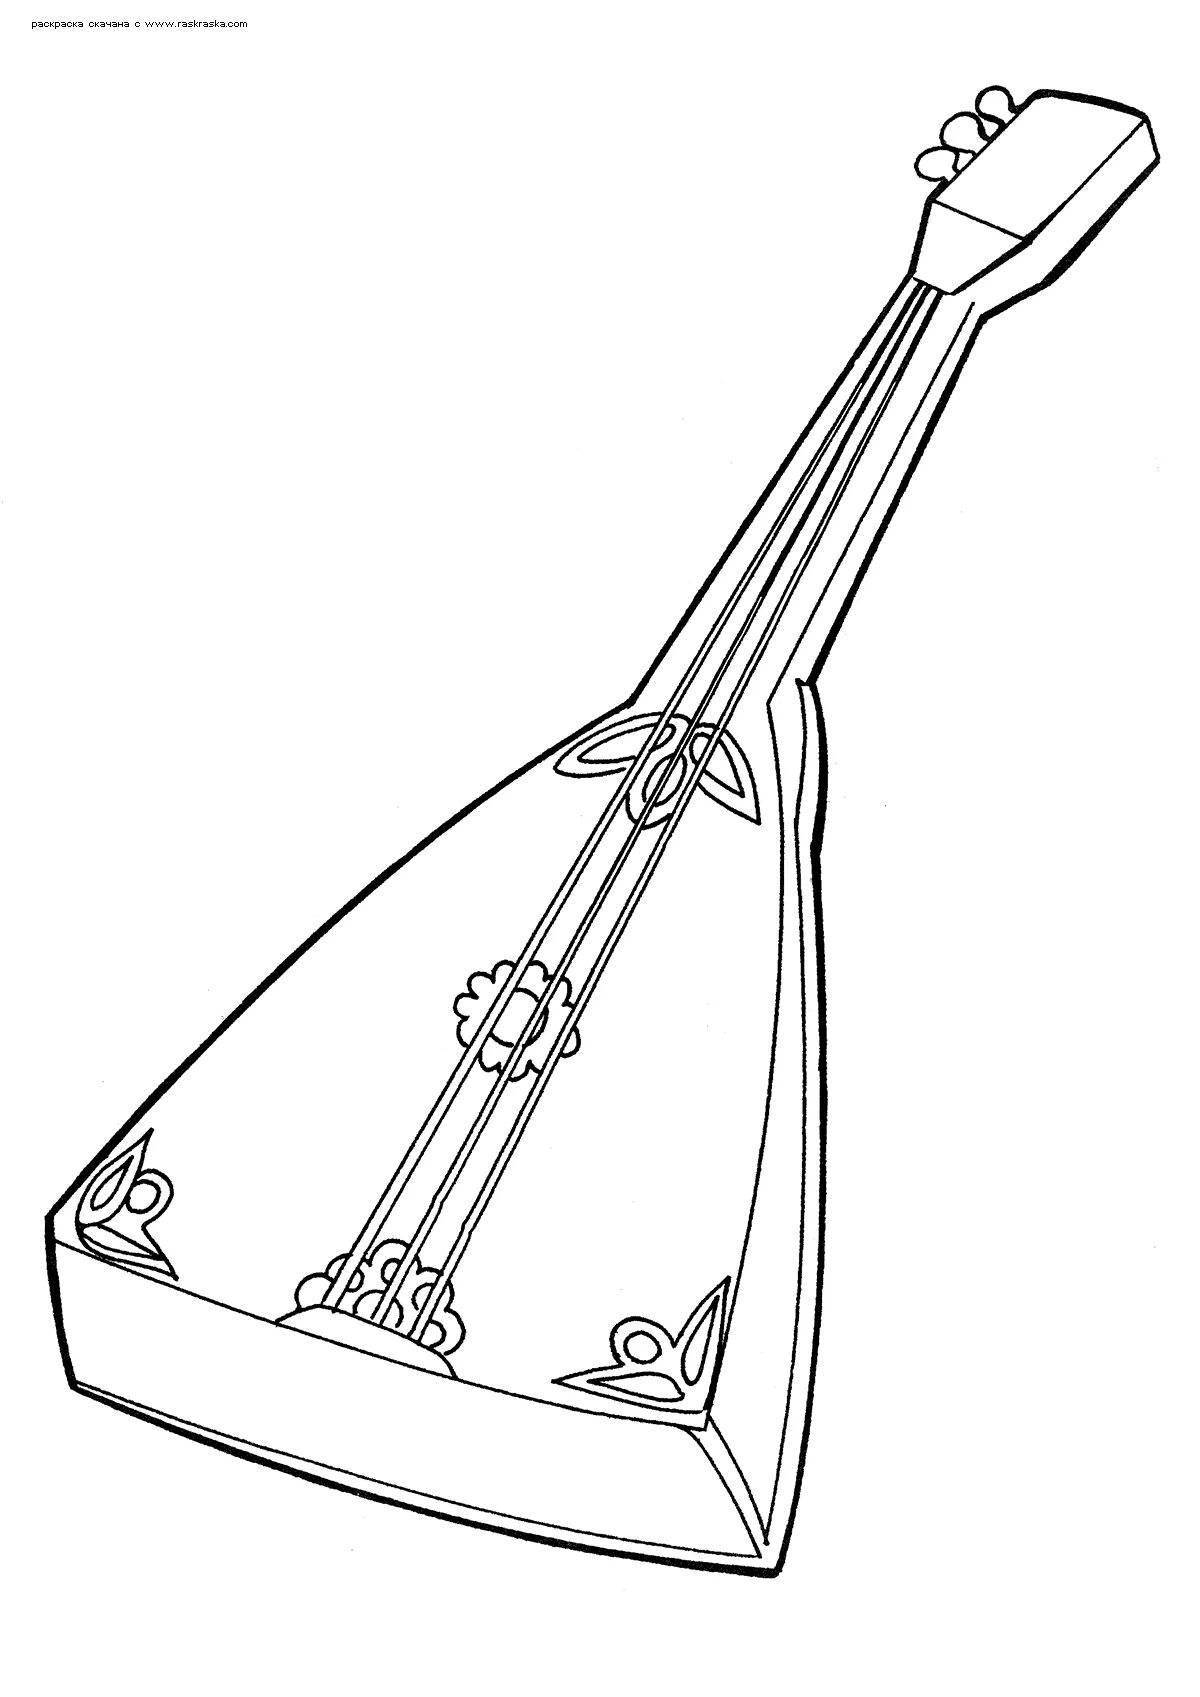 Intriguing Russian folk musical instruments coloring page